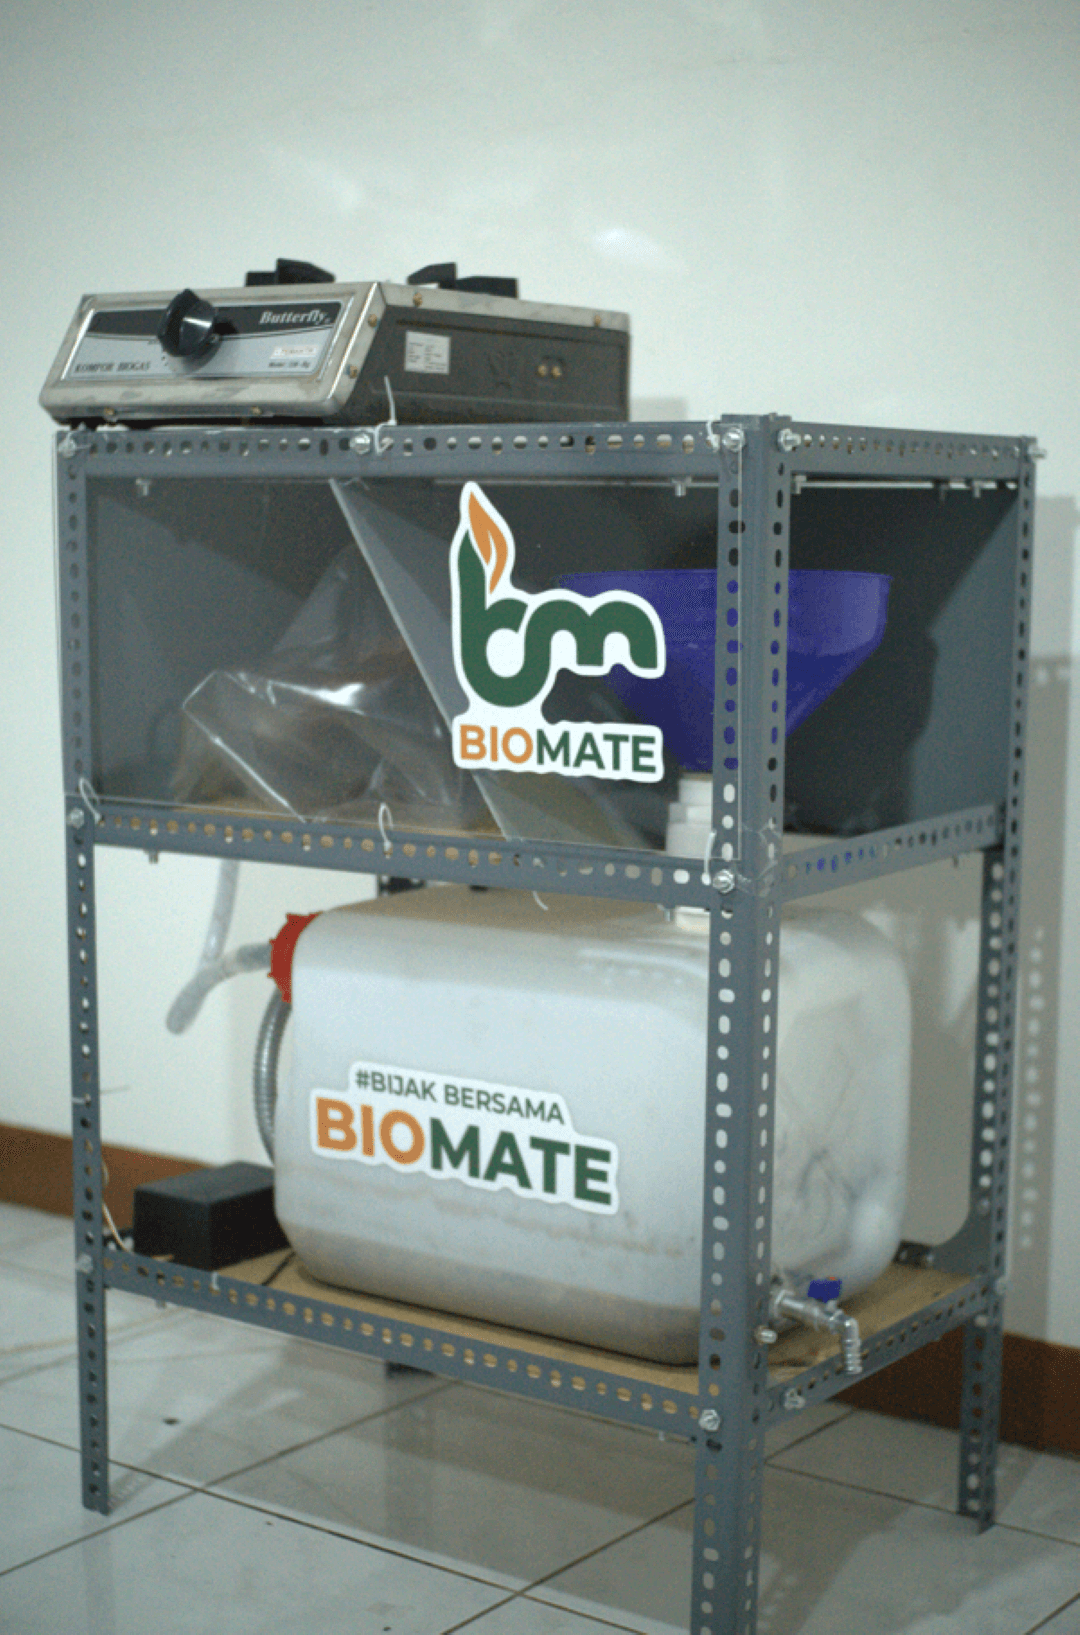 bandungs-waste-solutions-itb-students-innovate-biomate-for-trash-reduction